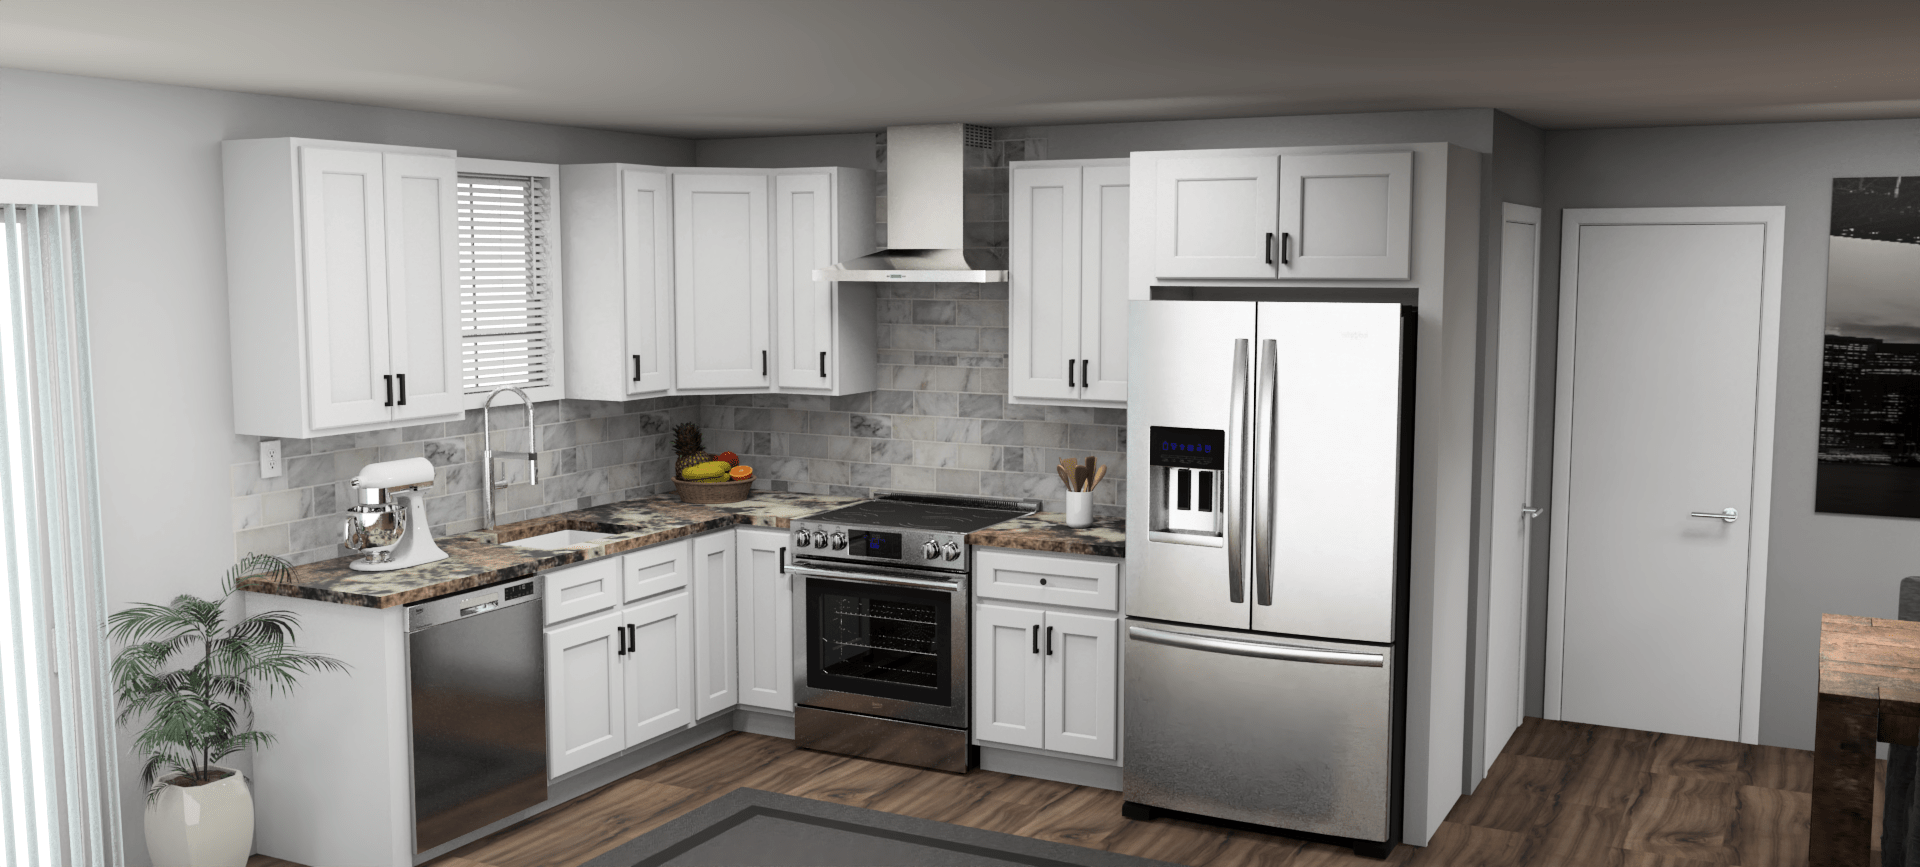 Fabuwood Quest Metro Frost 8 x 11 L Shaped Kitchen | Cabinets